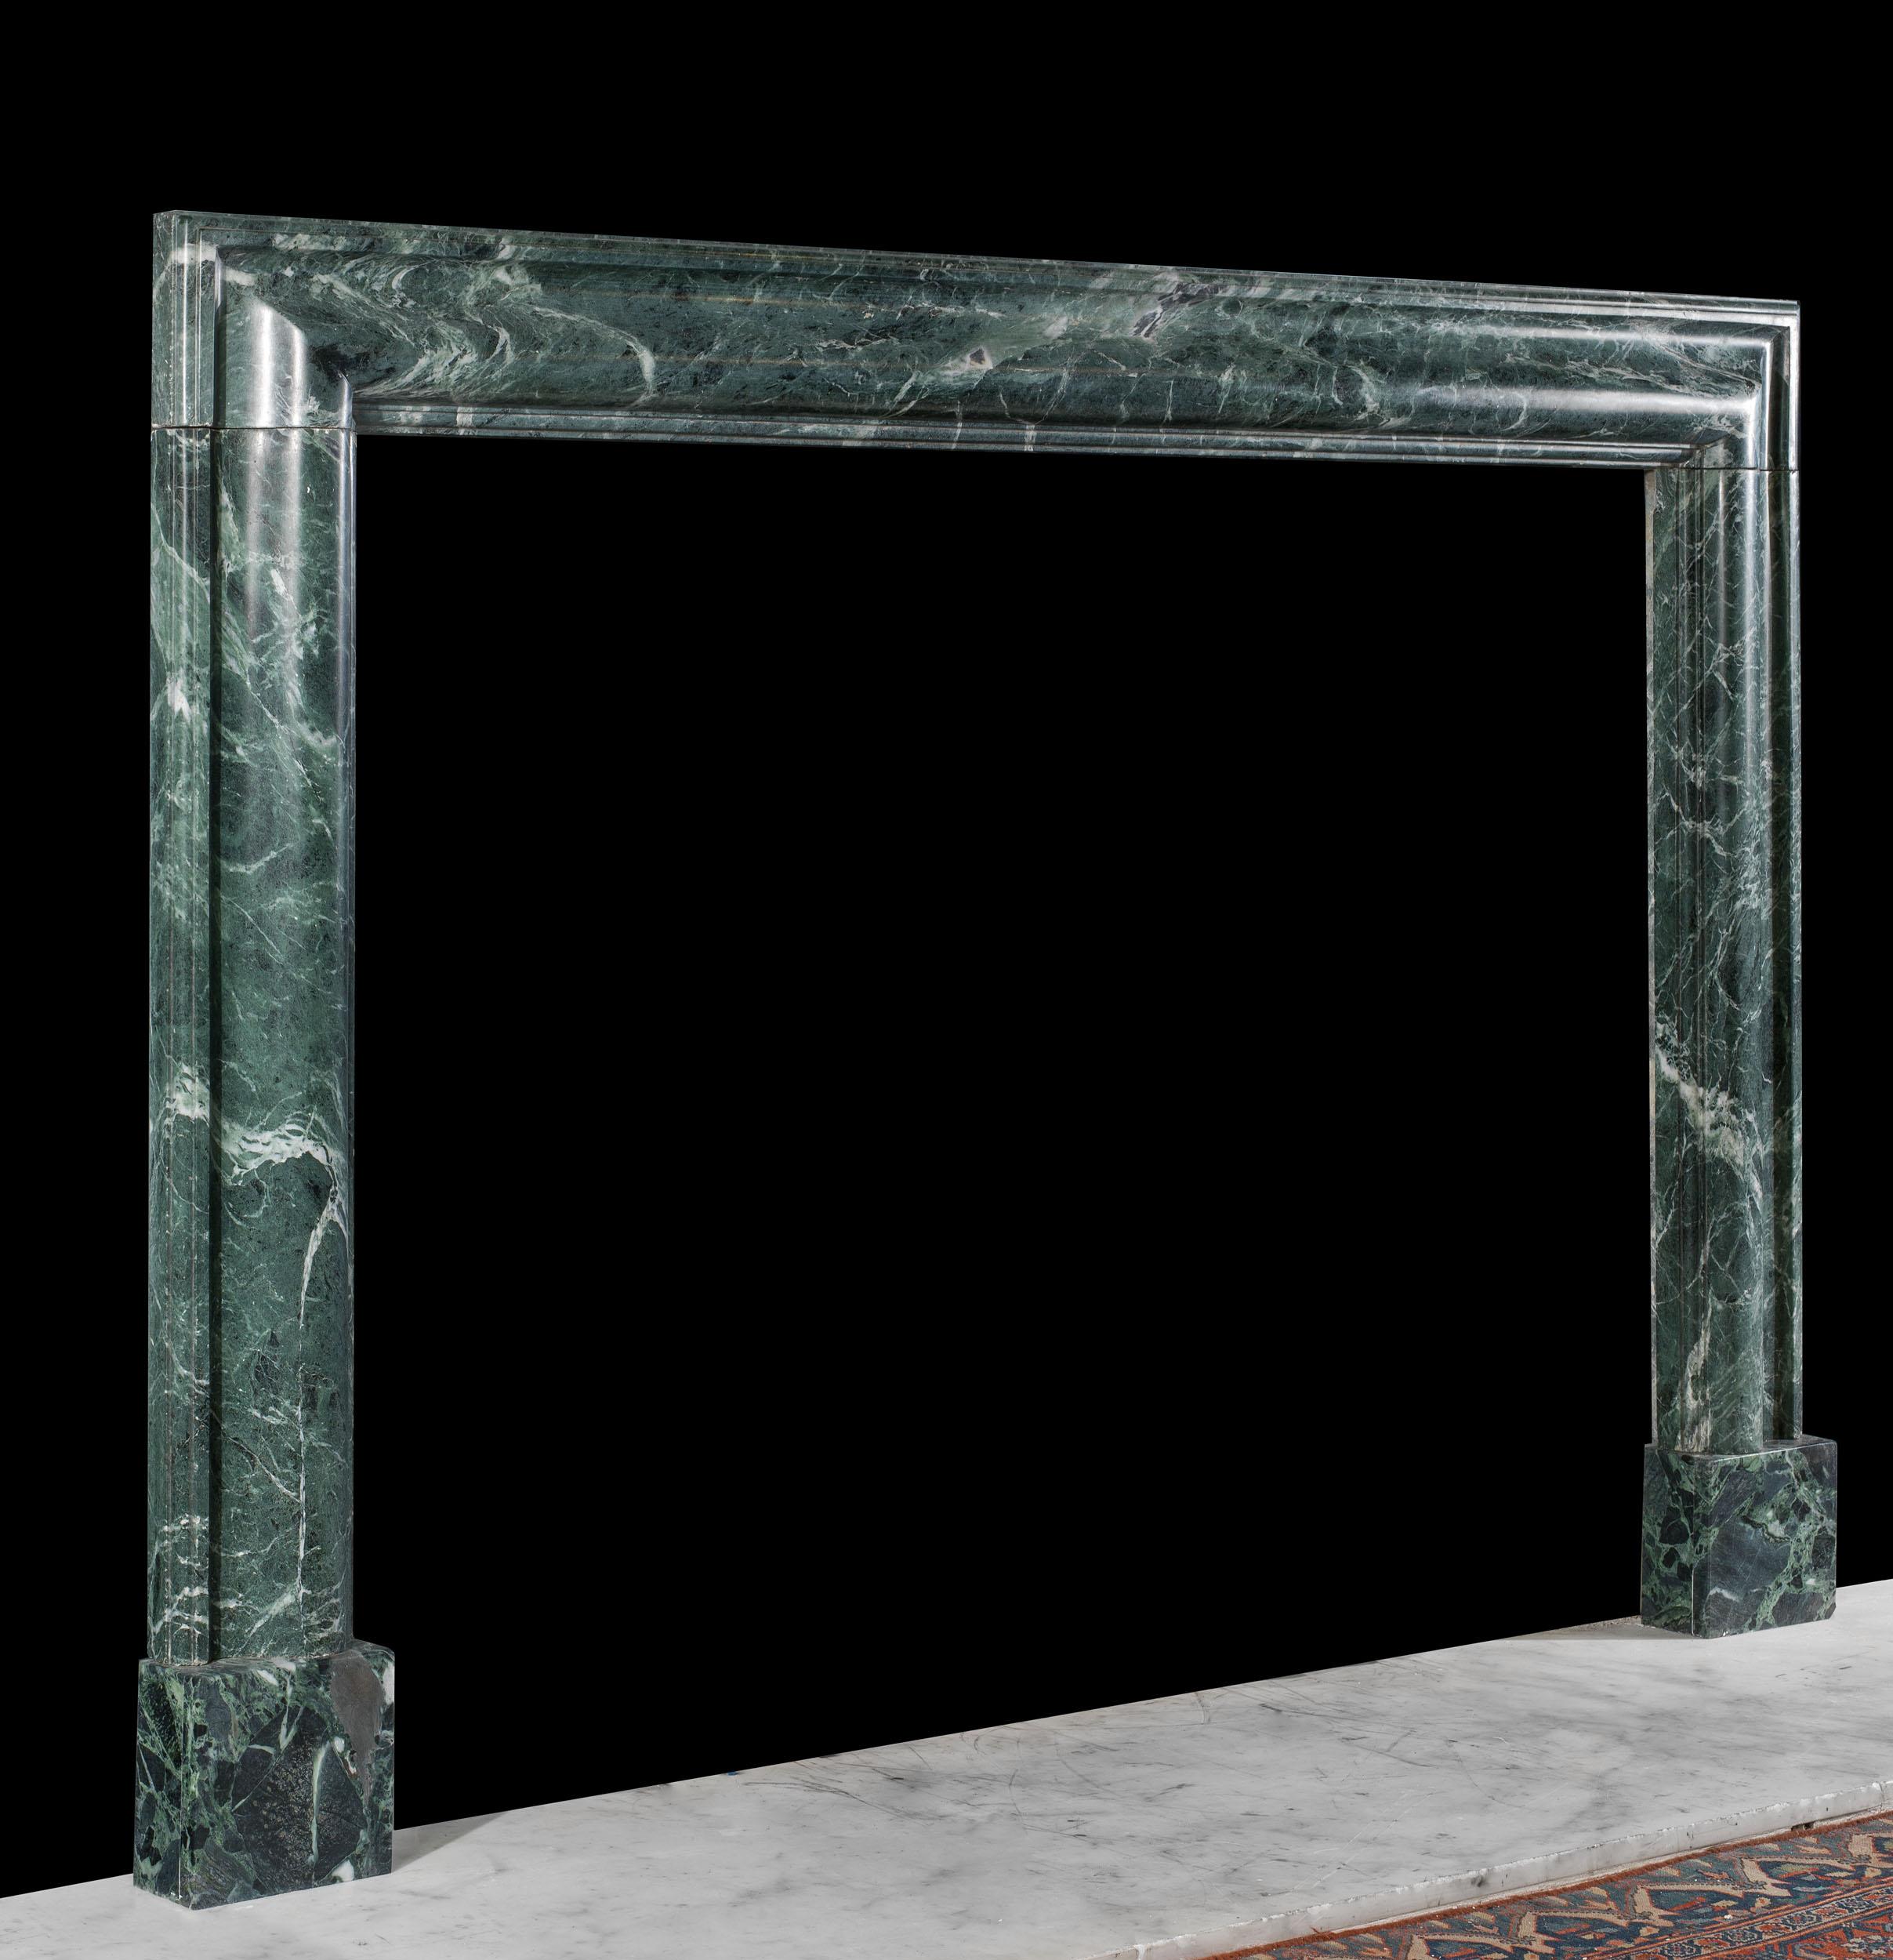 An antique bolection fireplace in boldly veined green verde antico marble.
English, c.1930.